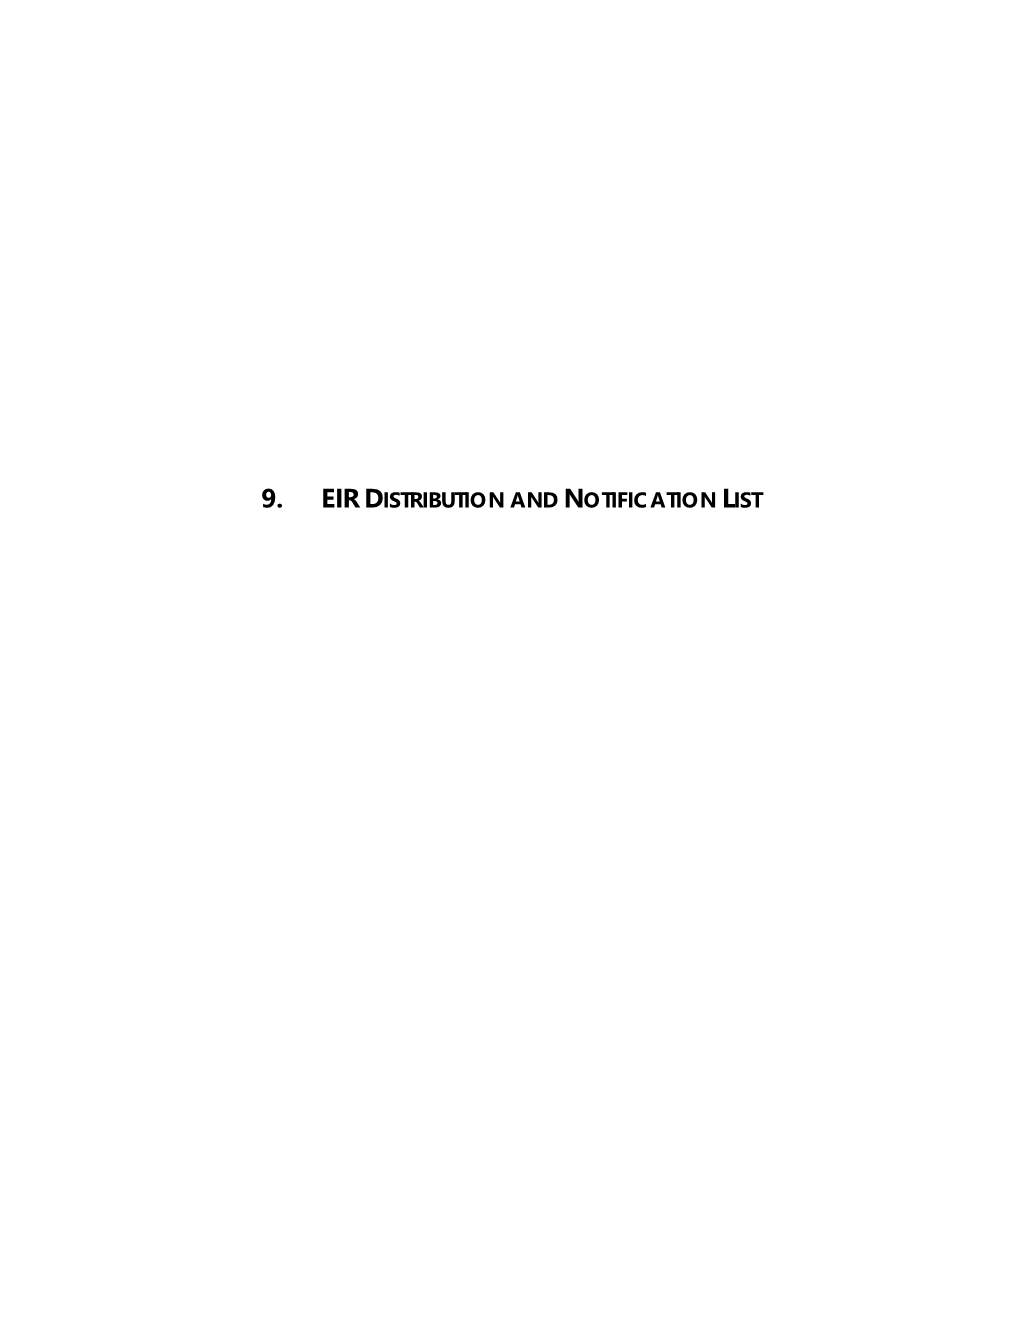 Chapter 9 Eir Distribution and Notification List